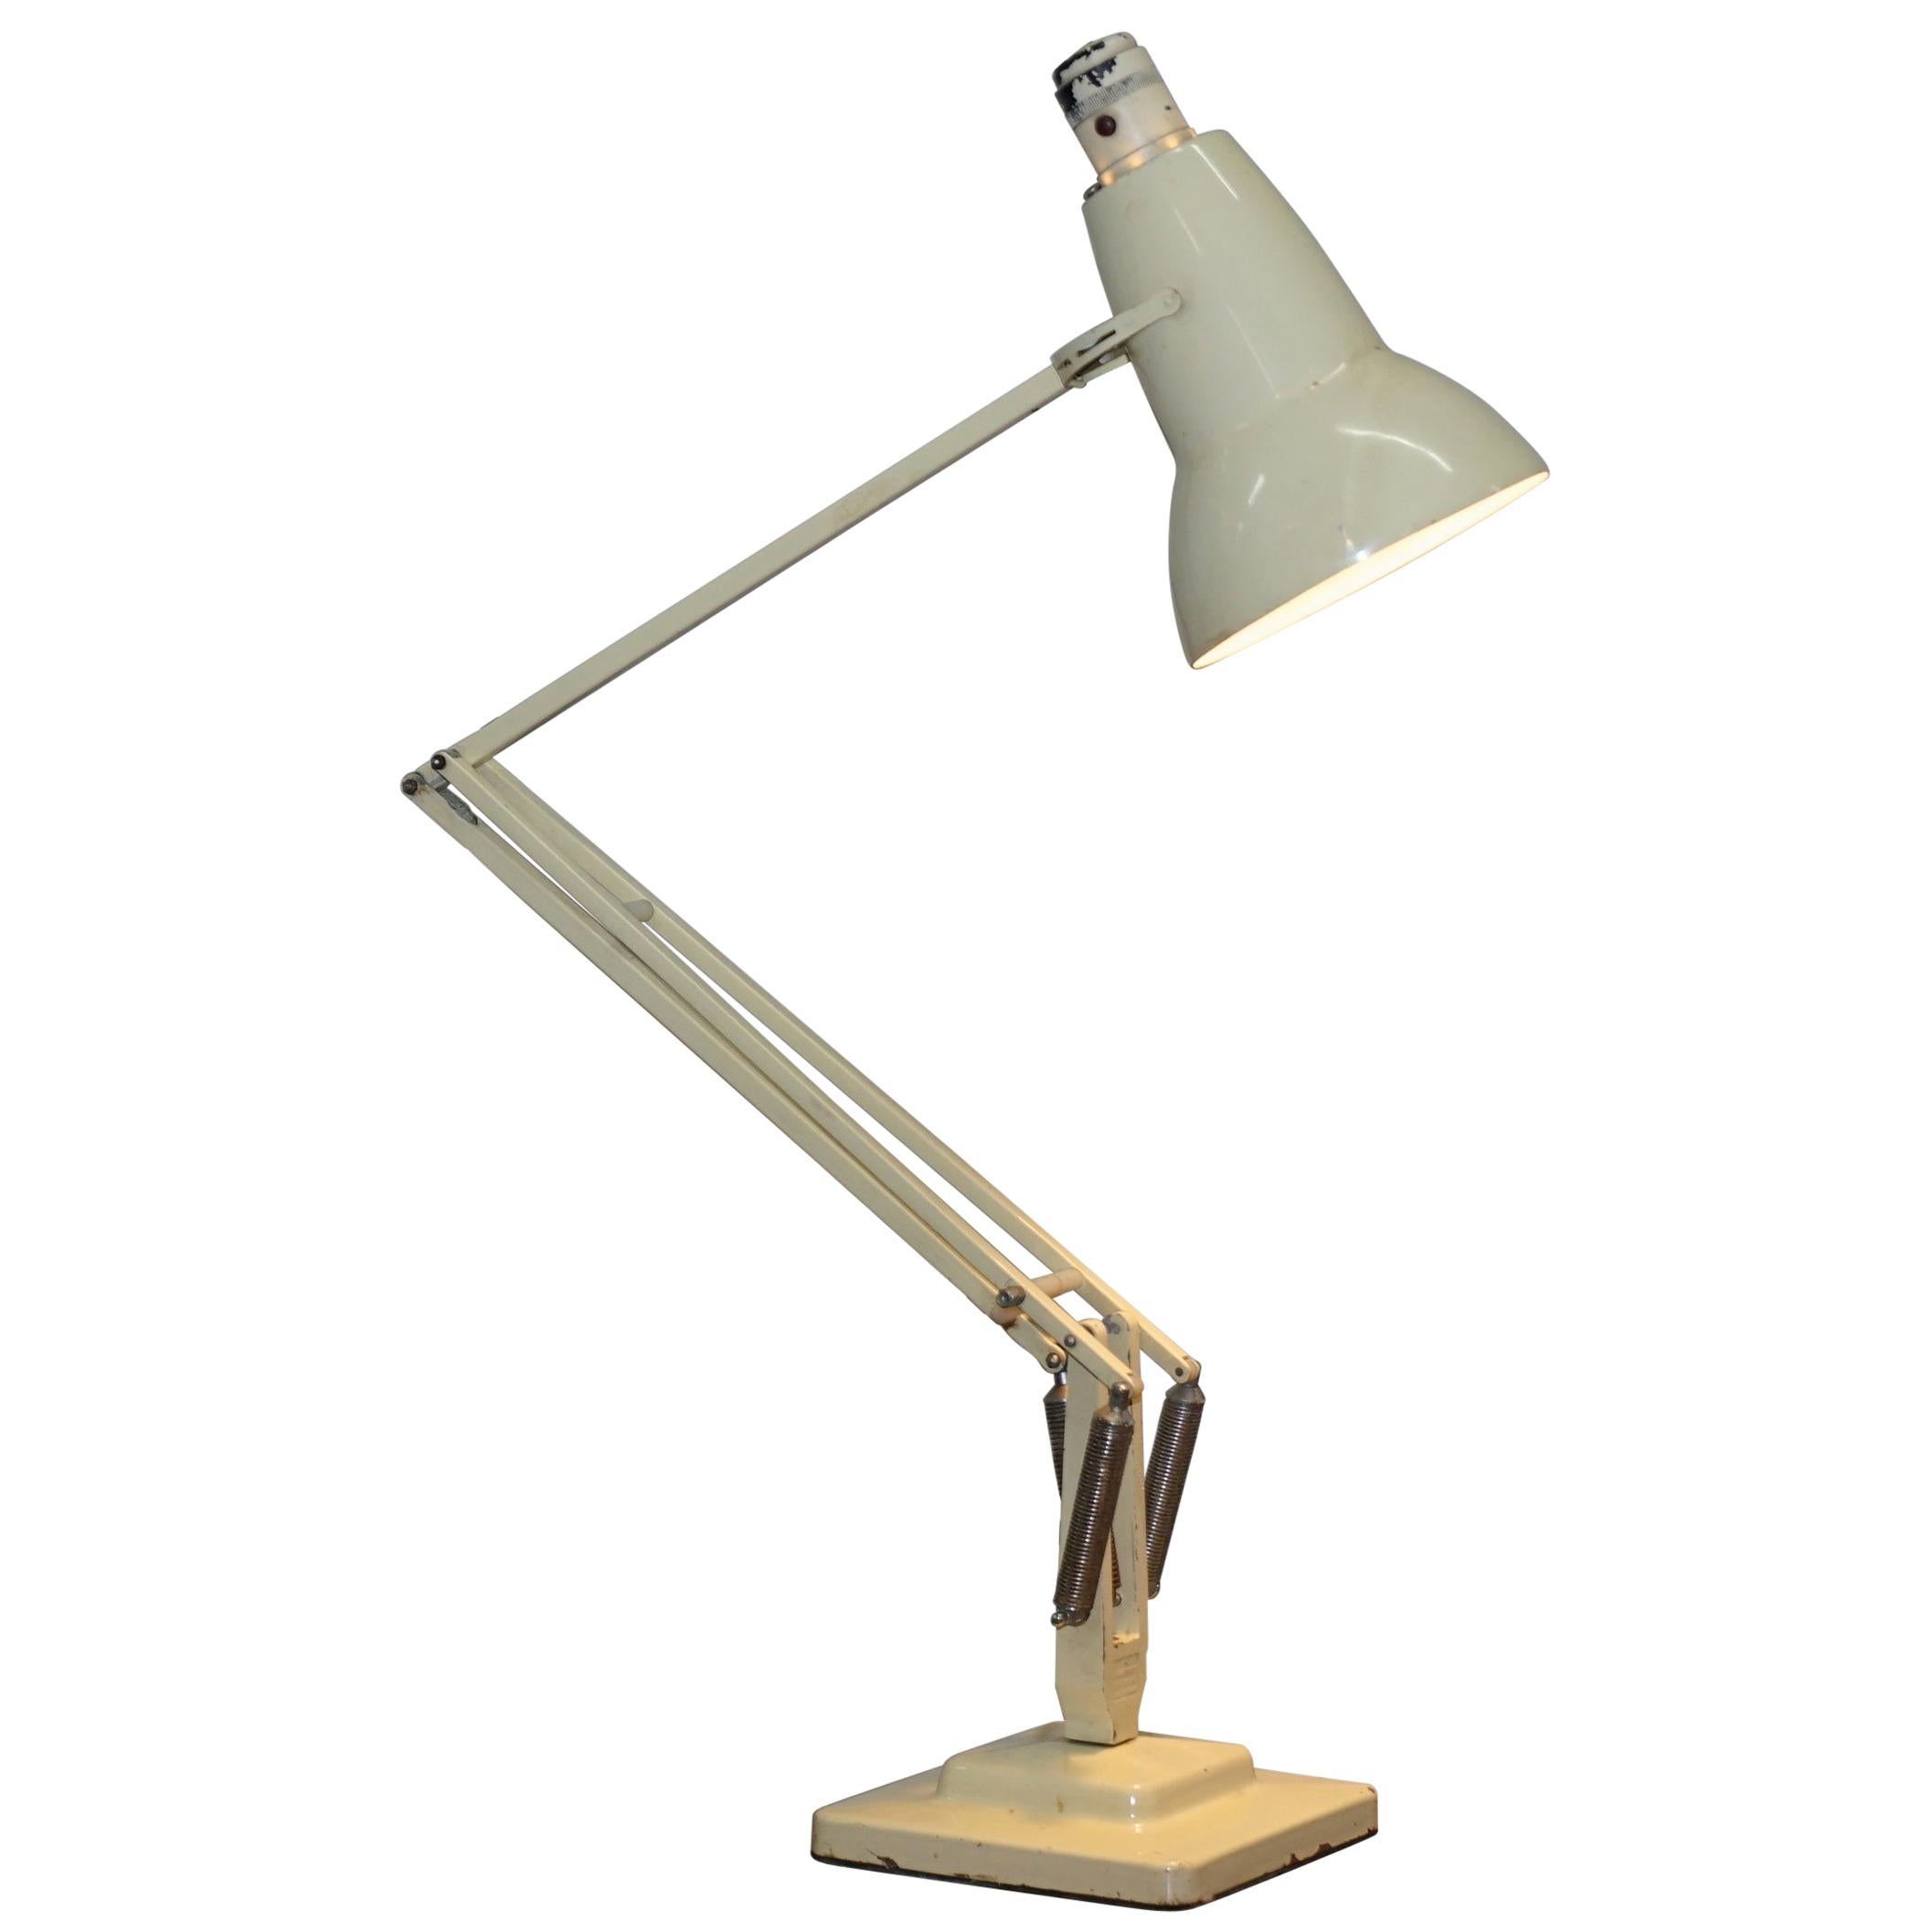 Herbert Terry Model 1227 Anglepoise Articulated Table Lamp Original Cream Paint